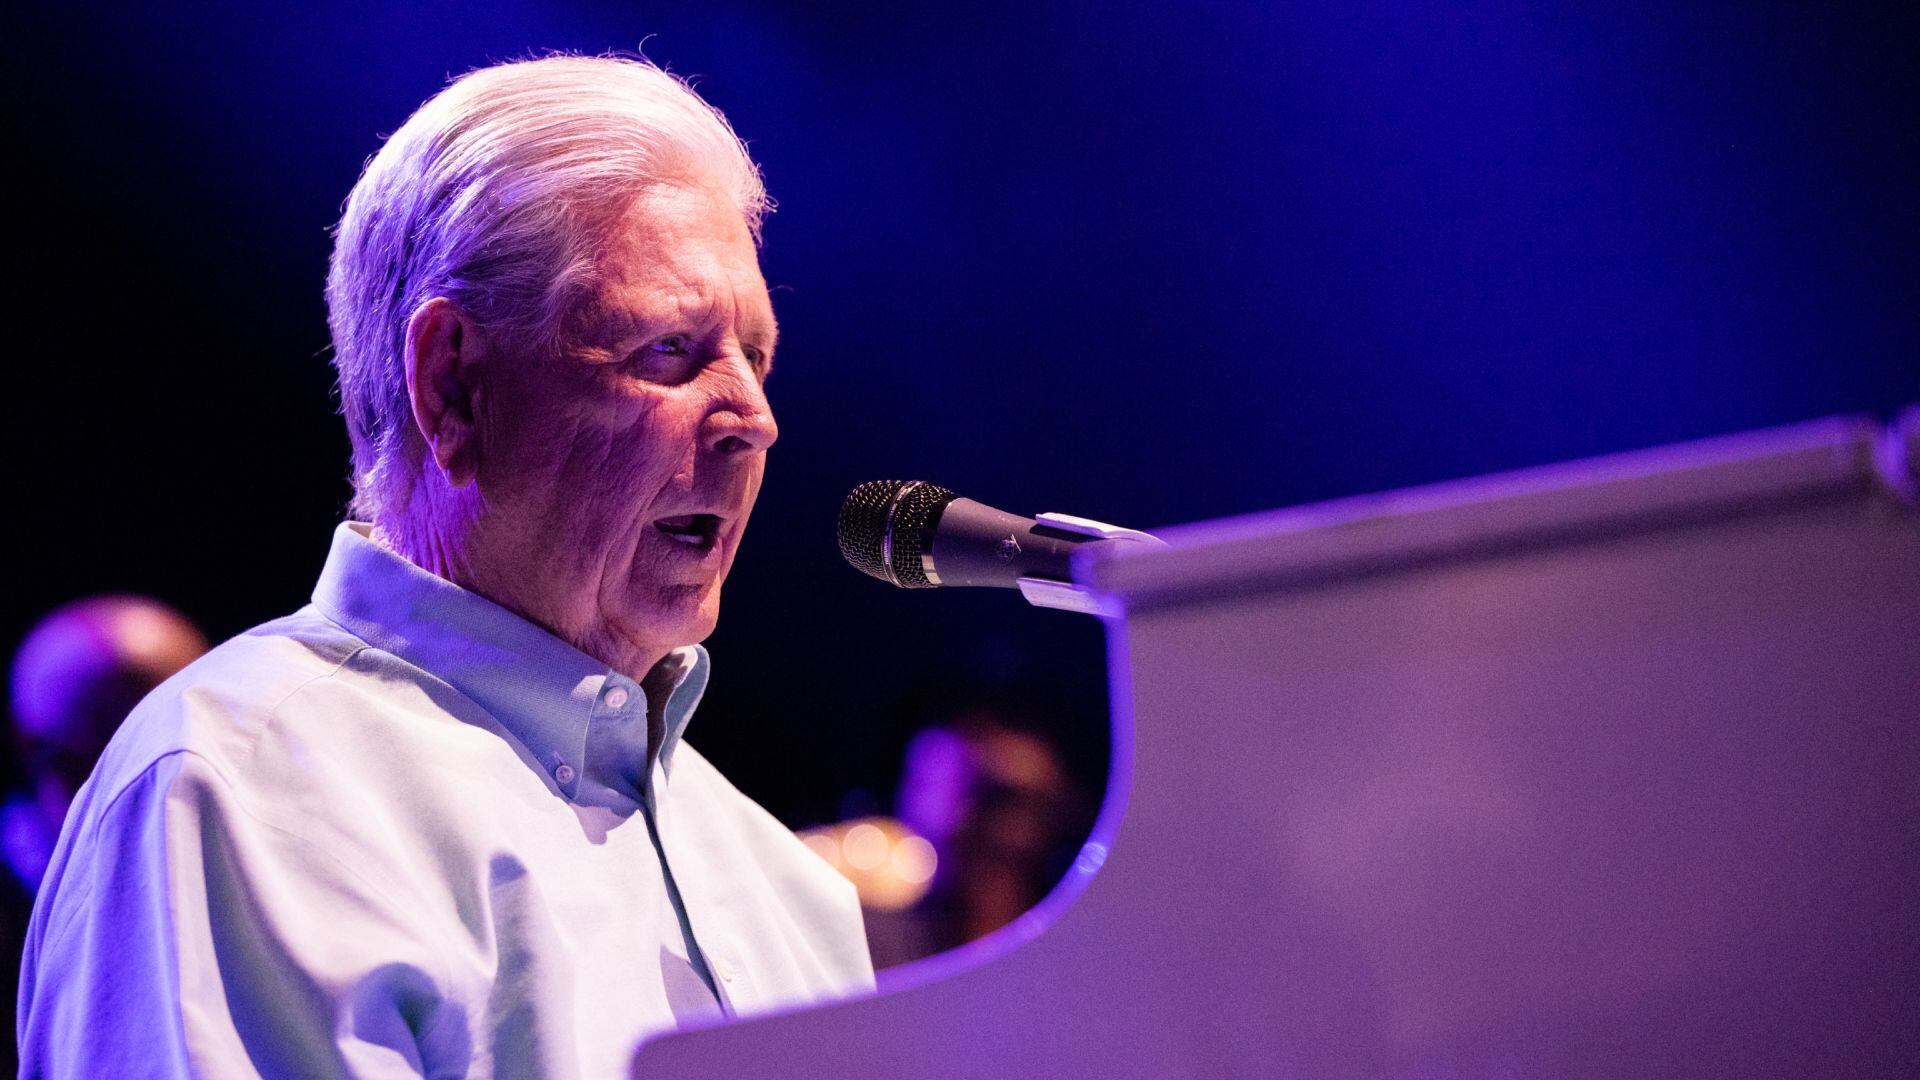 Brian Wilson, founding member of The Beach Boys, performs onstage at The Kia Forum on June 09, 2022 in Inglewood, California. (Photo by Scott Dudelson/Getty Images)